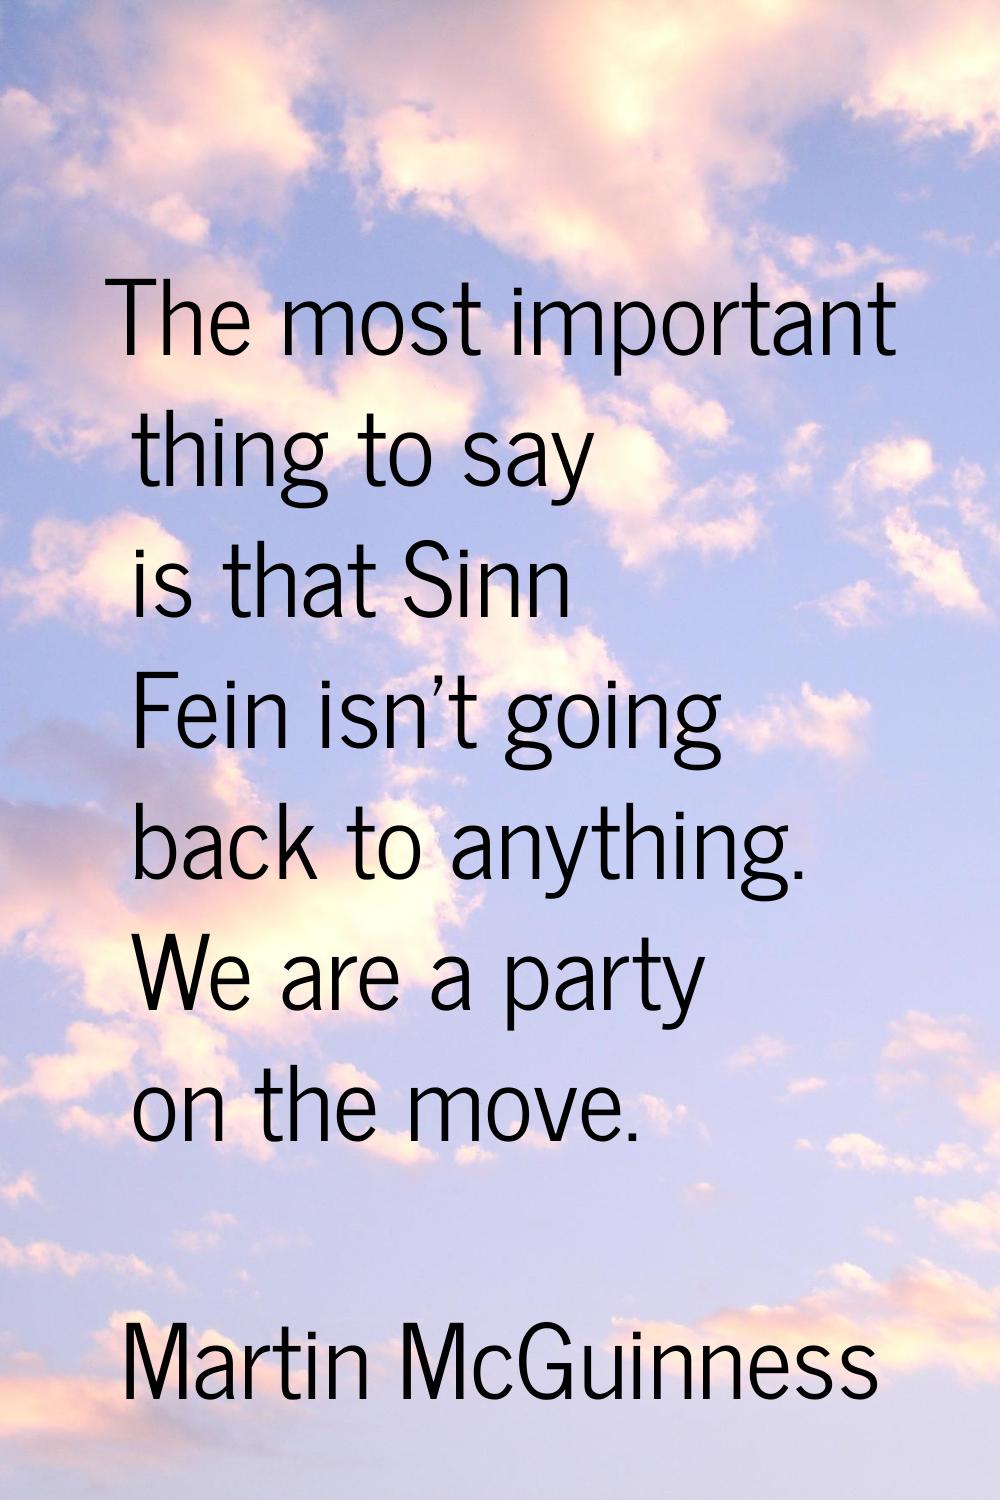 The most important thing to say is that Sinn Fein isn't going back to anything. We are a party on t